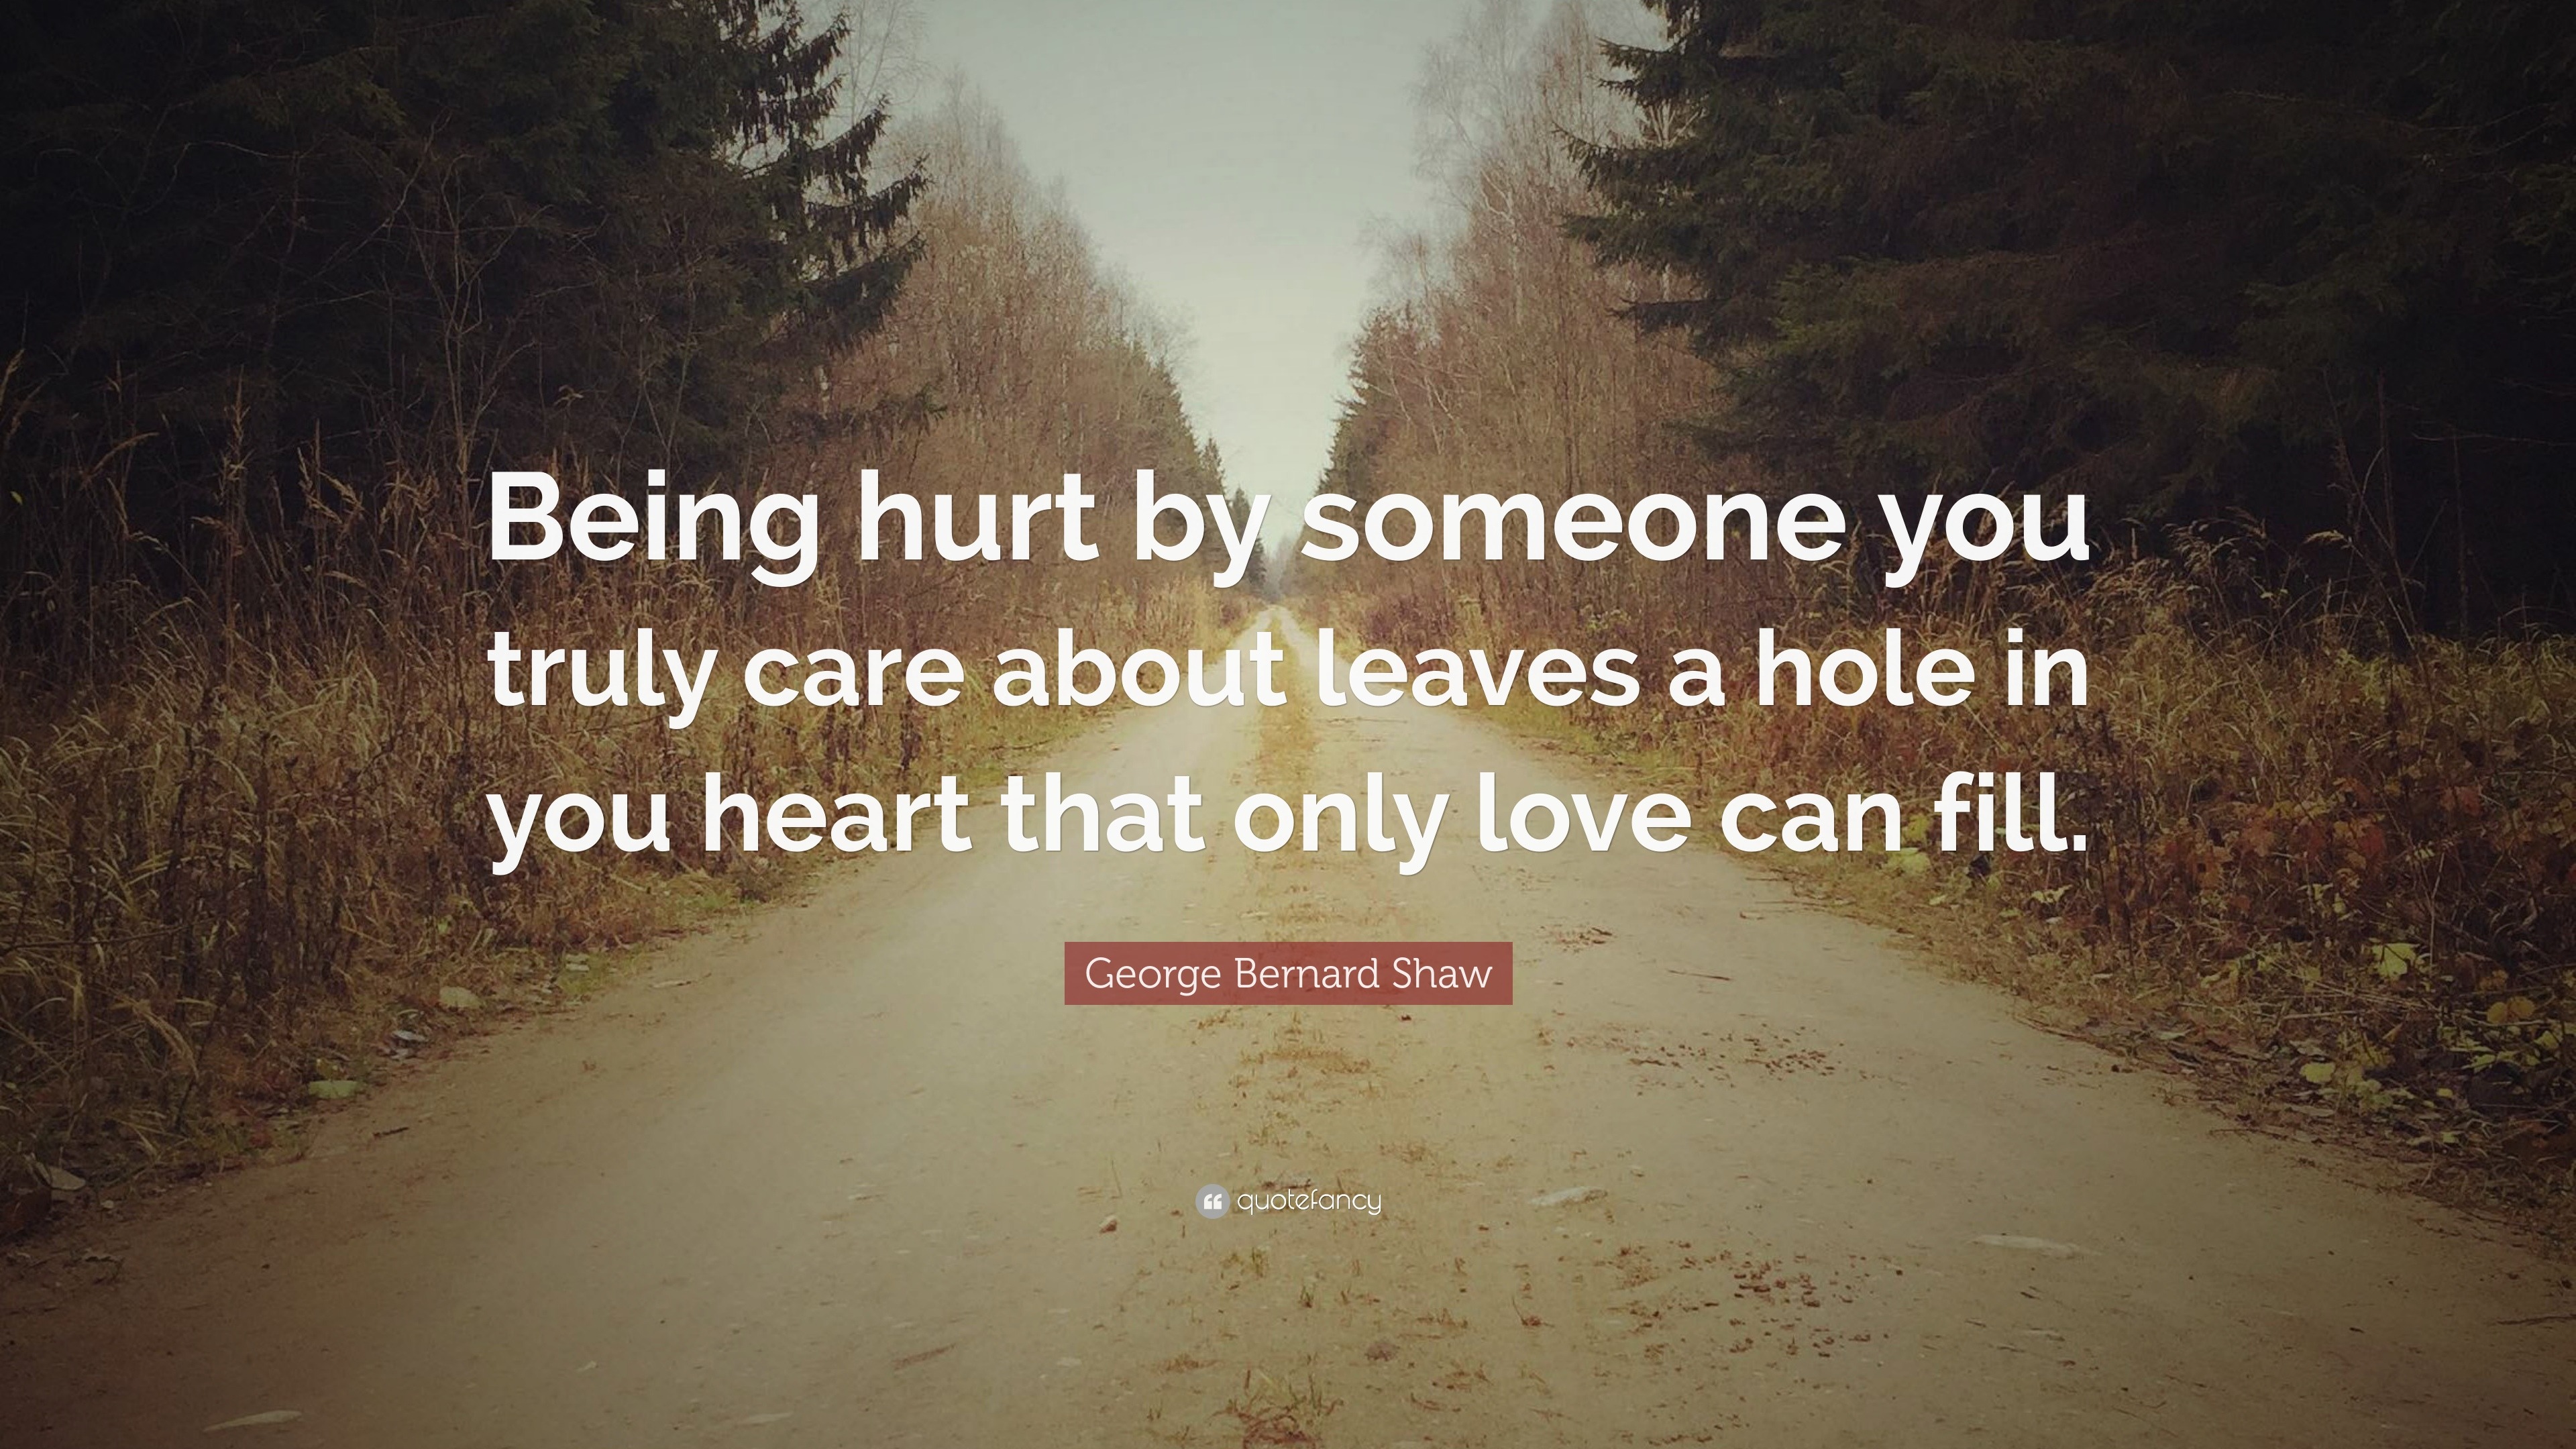 George Bernard Shaw Quote “Being hurt by someone you truly care about leaves a